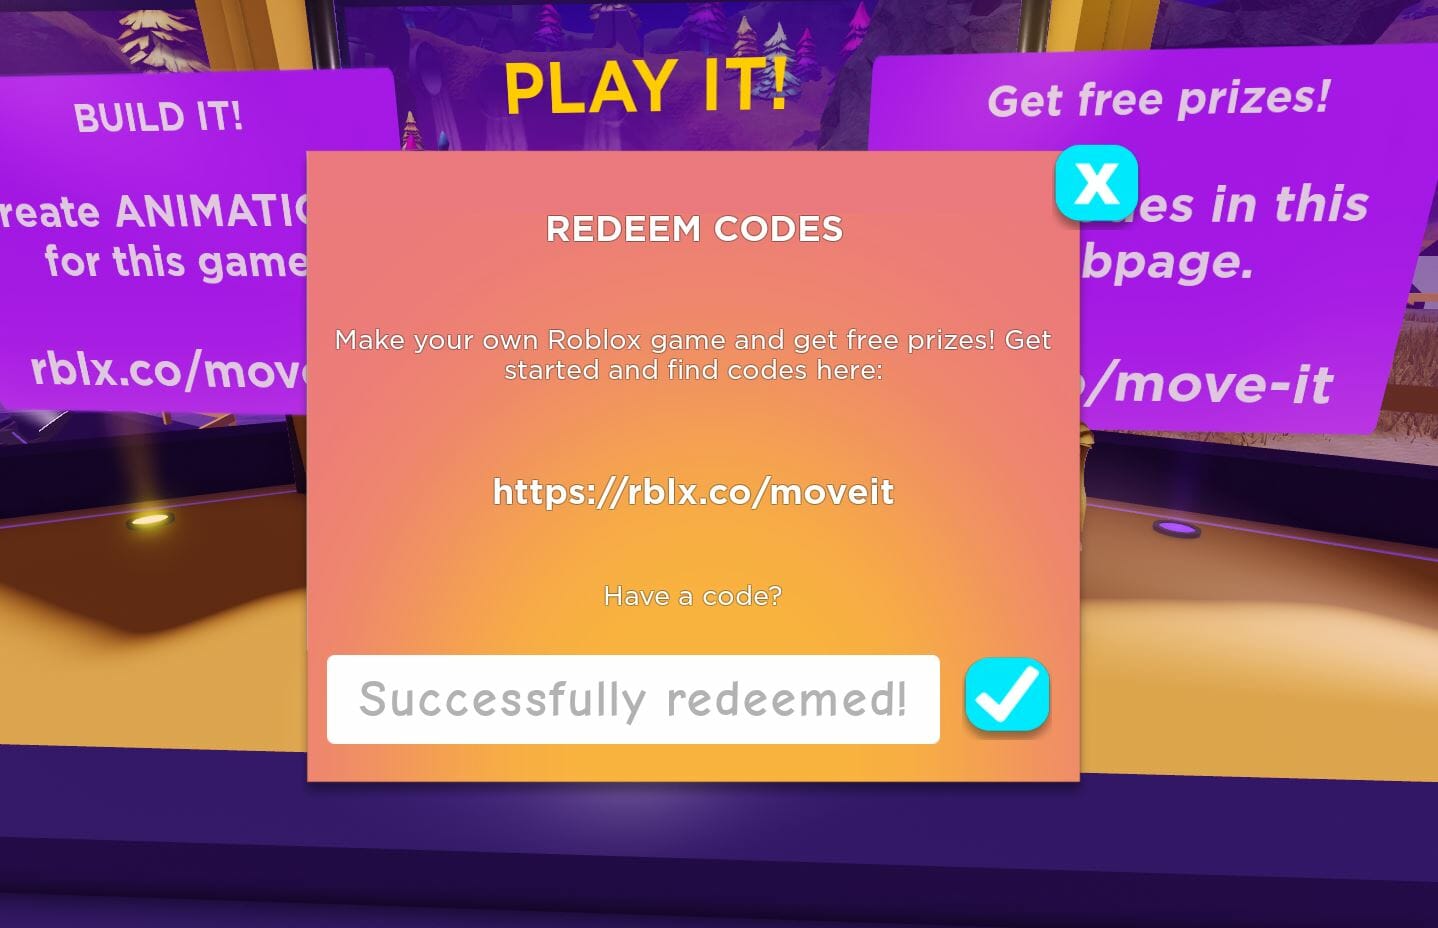 Roblox Promo Codes - Active Free Item Codes March 2022 - Fortnite